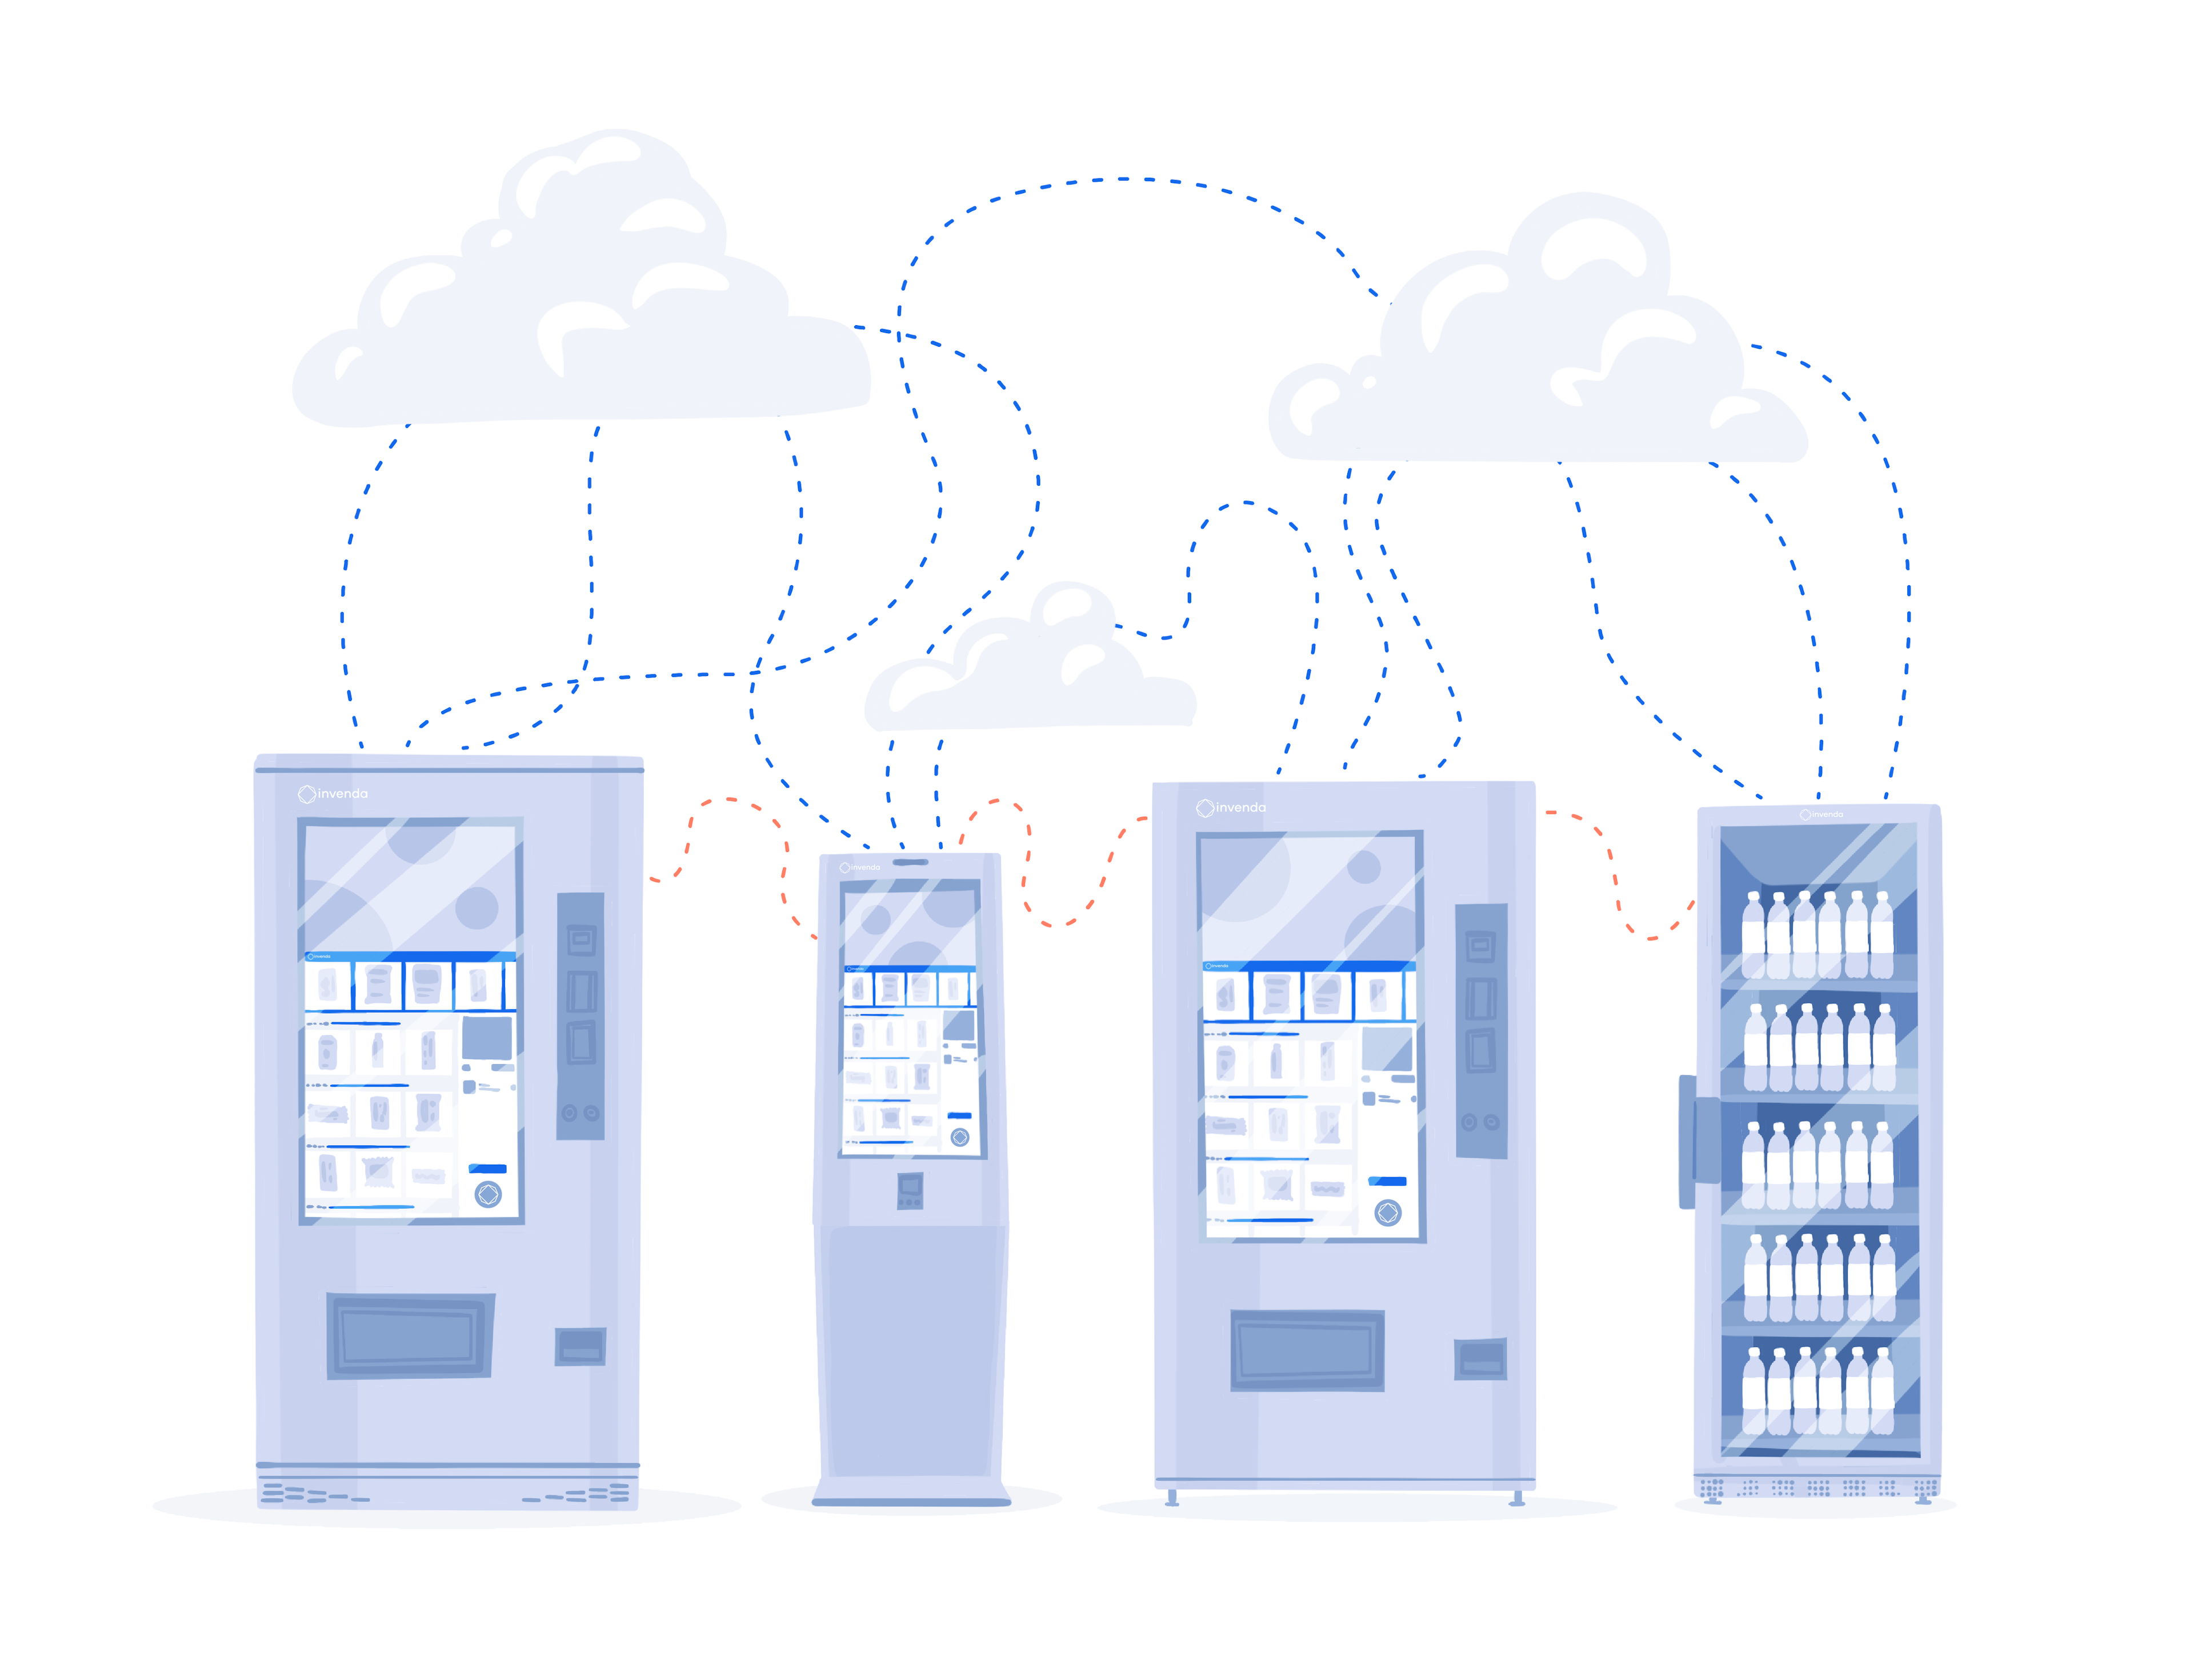 Vending Machines Connected to Cloud